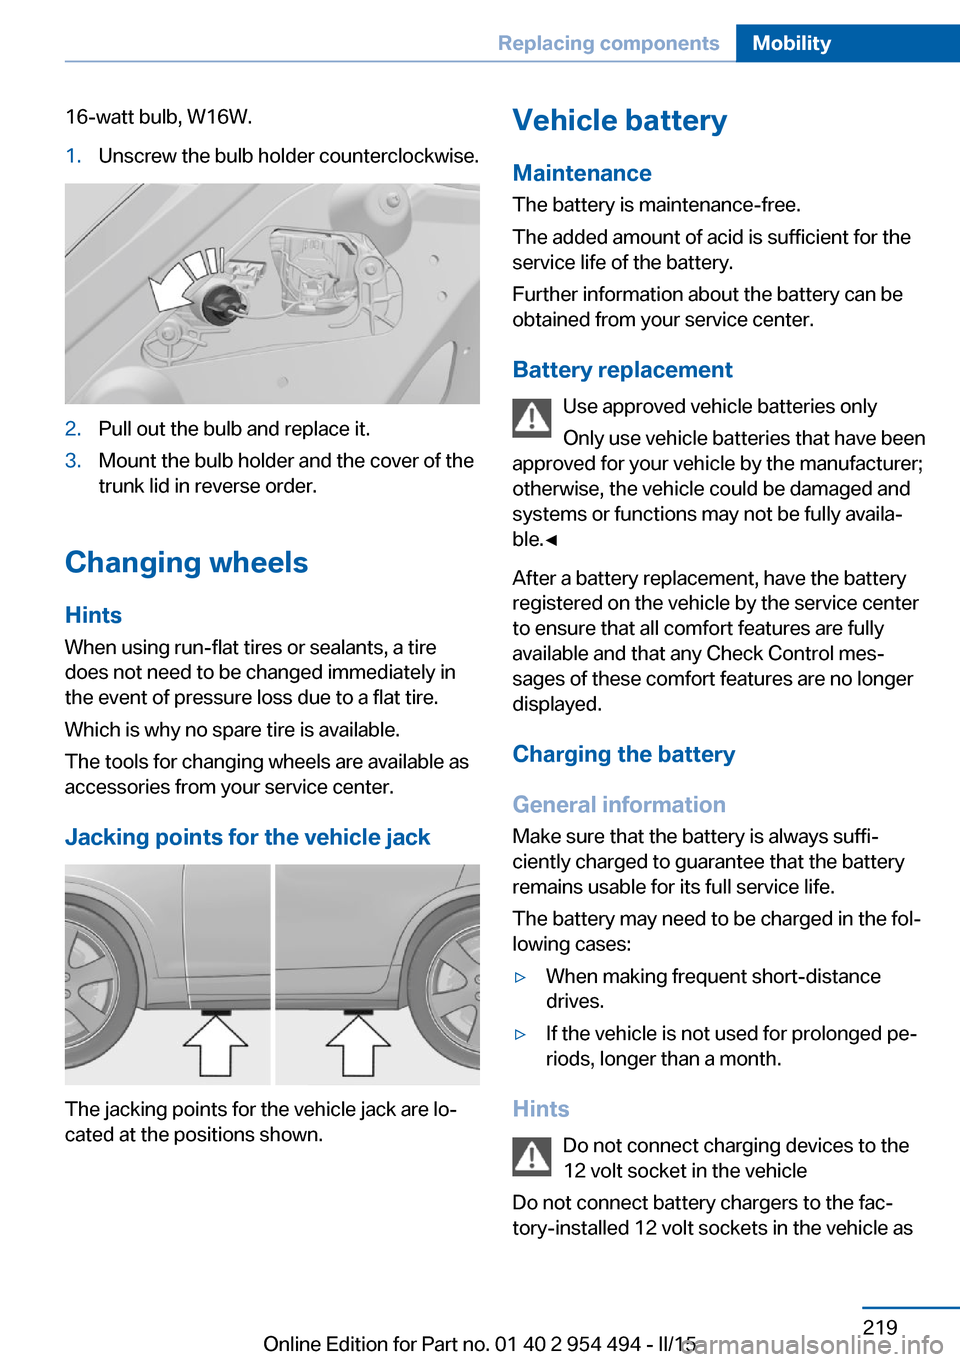 BMW 6 SERIES COUPE 2015 F13 Owners Manual 16-watt bulb, W16W.1.Unscrew the bulb holder counterclockwise.2.Pull out the bulb and replace it.3.Mount the bulb holder and the cover of the
trunk lid in reverse order.
Changing wheels
Hints
When usi